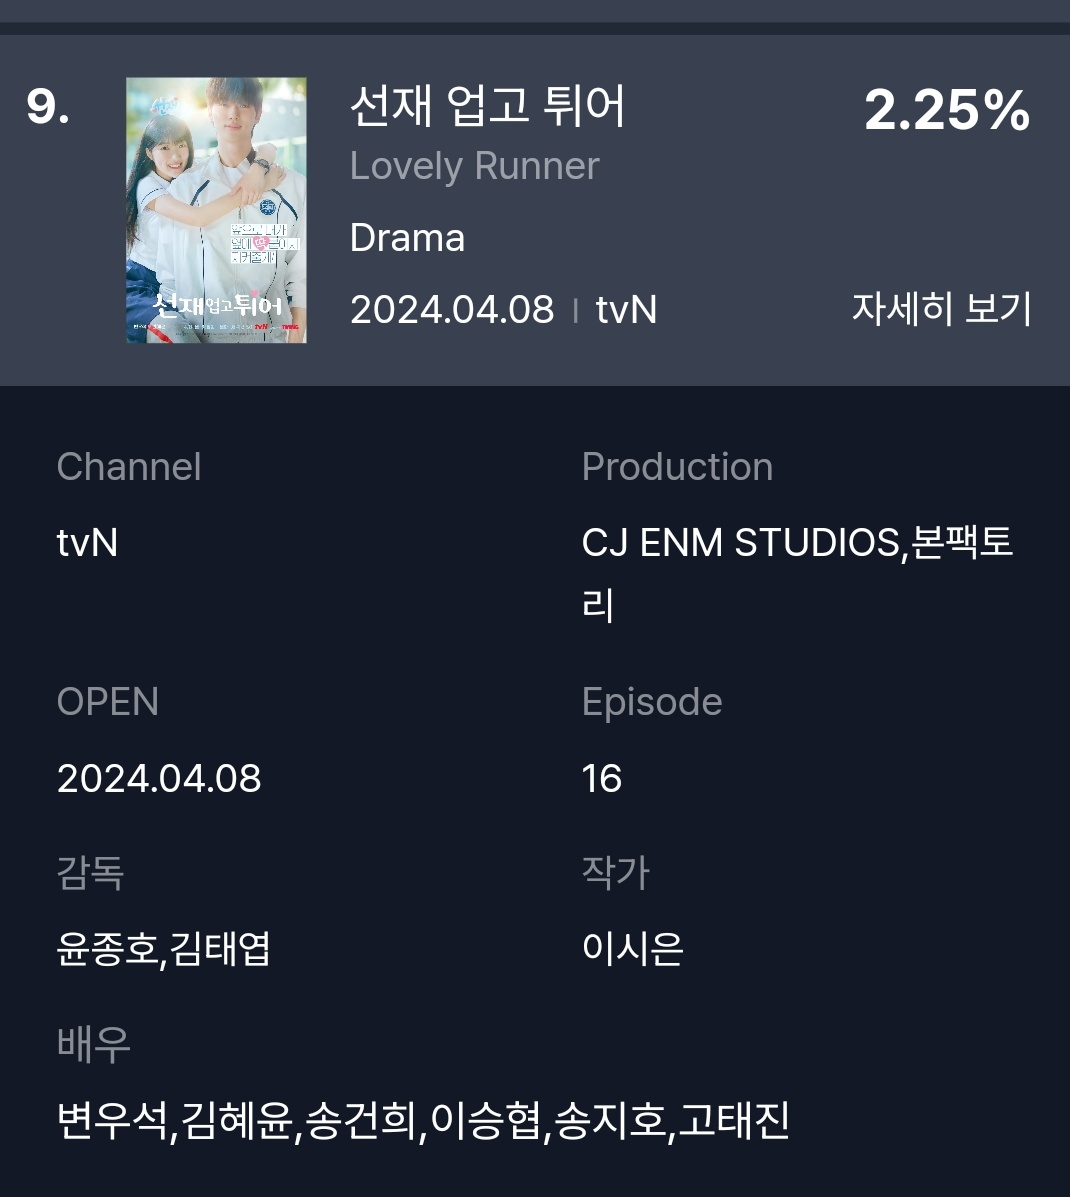 GoodData Fundex Topicality Ranking for 3rd week of March 2024

Most Buzzworthy TV Drama category
# 9. Lovely Runner 2.25%

#KimHyeYoon #김혜윤 #ByeonWooseok #변우석 #선재업고튀어 #LovelyRunner